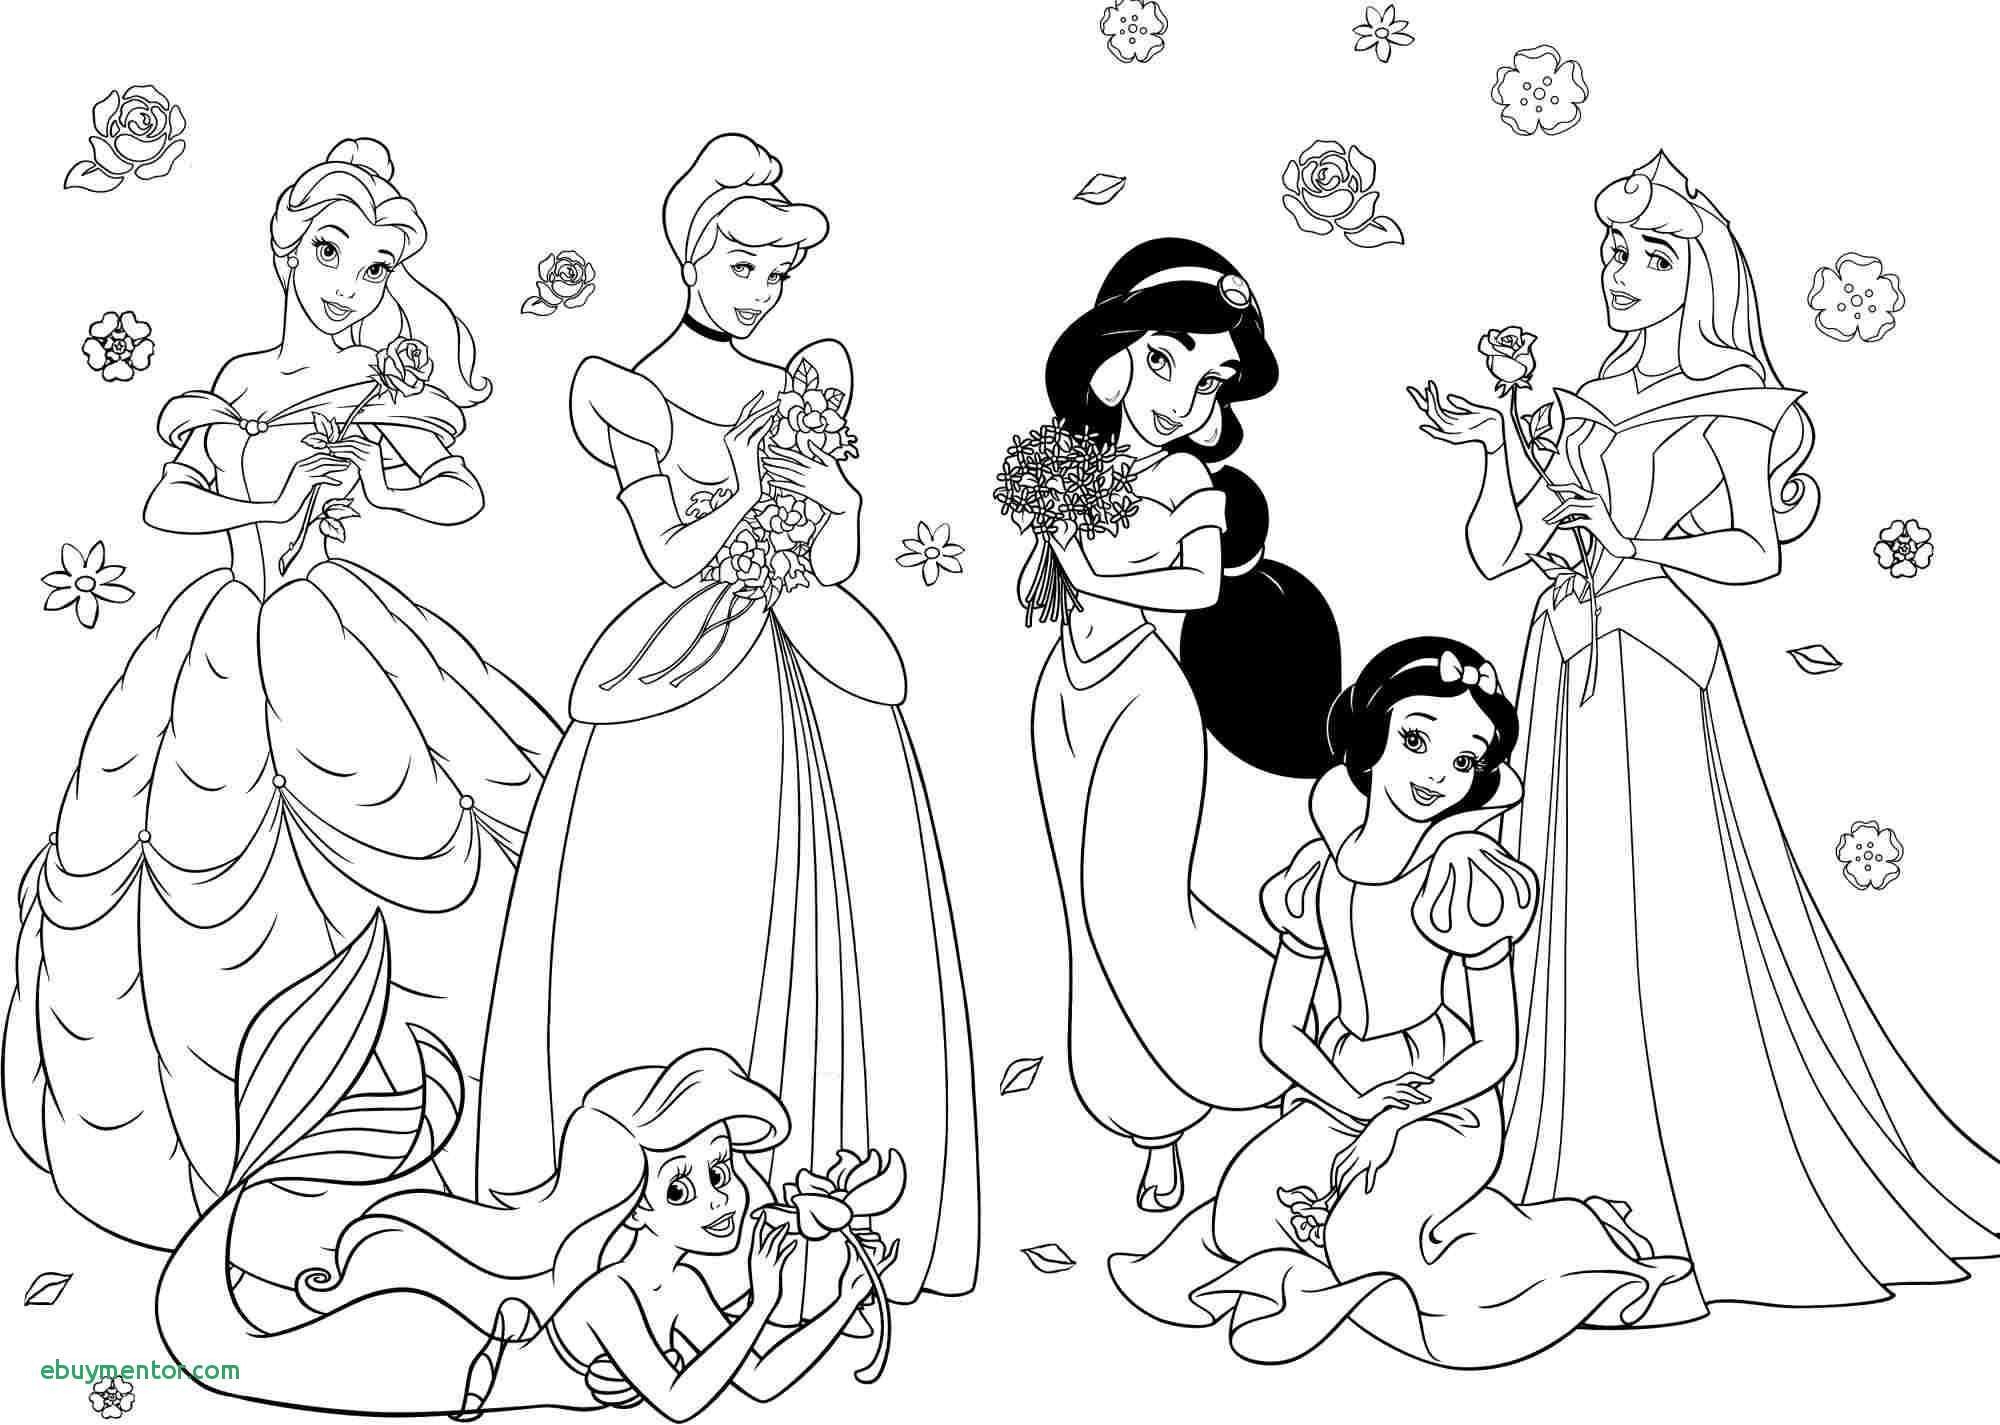 Princess with Dog Coloring Page - BubaKids.com